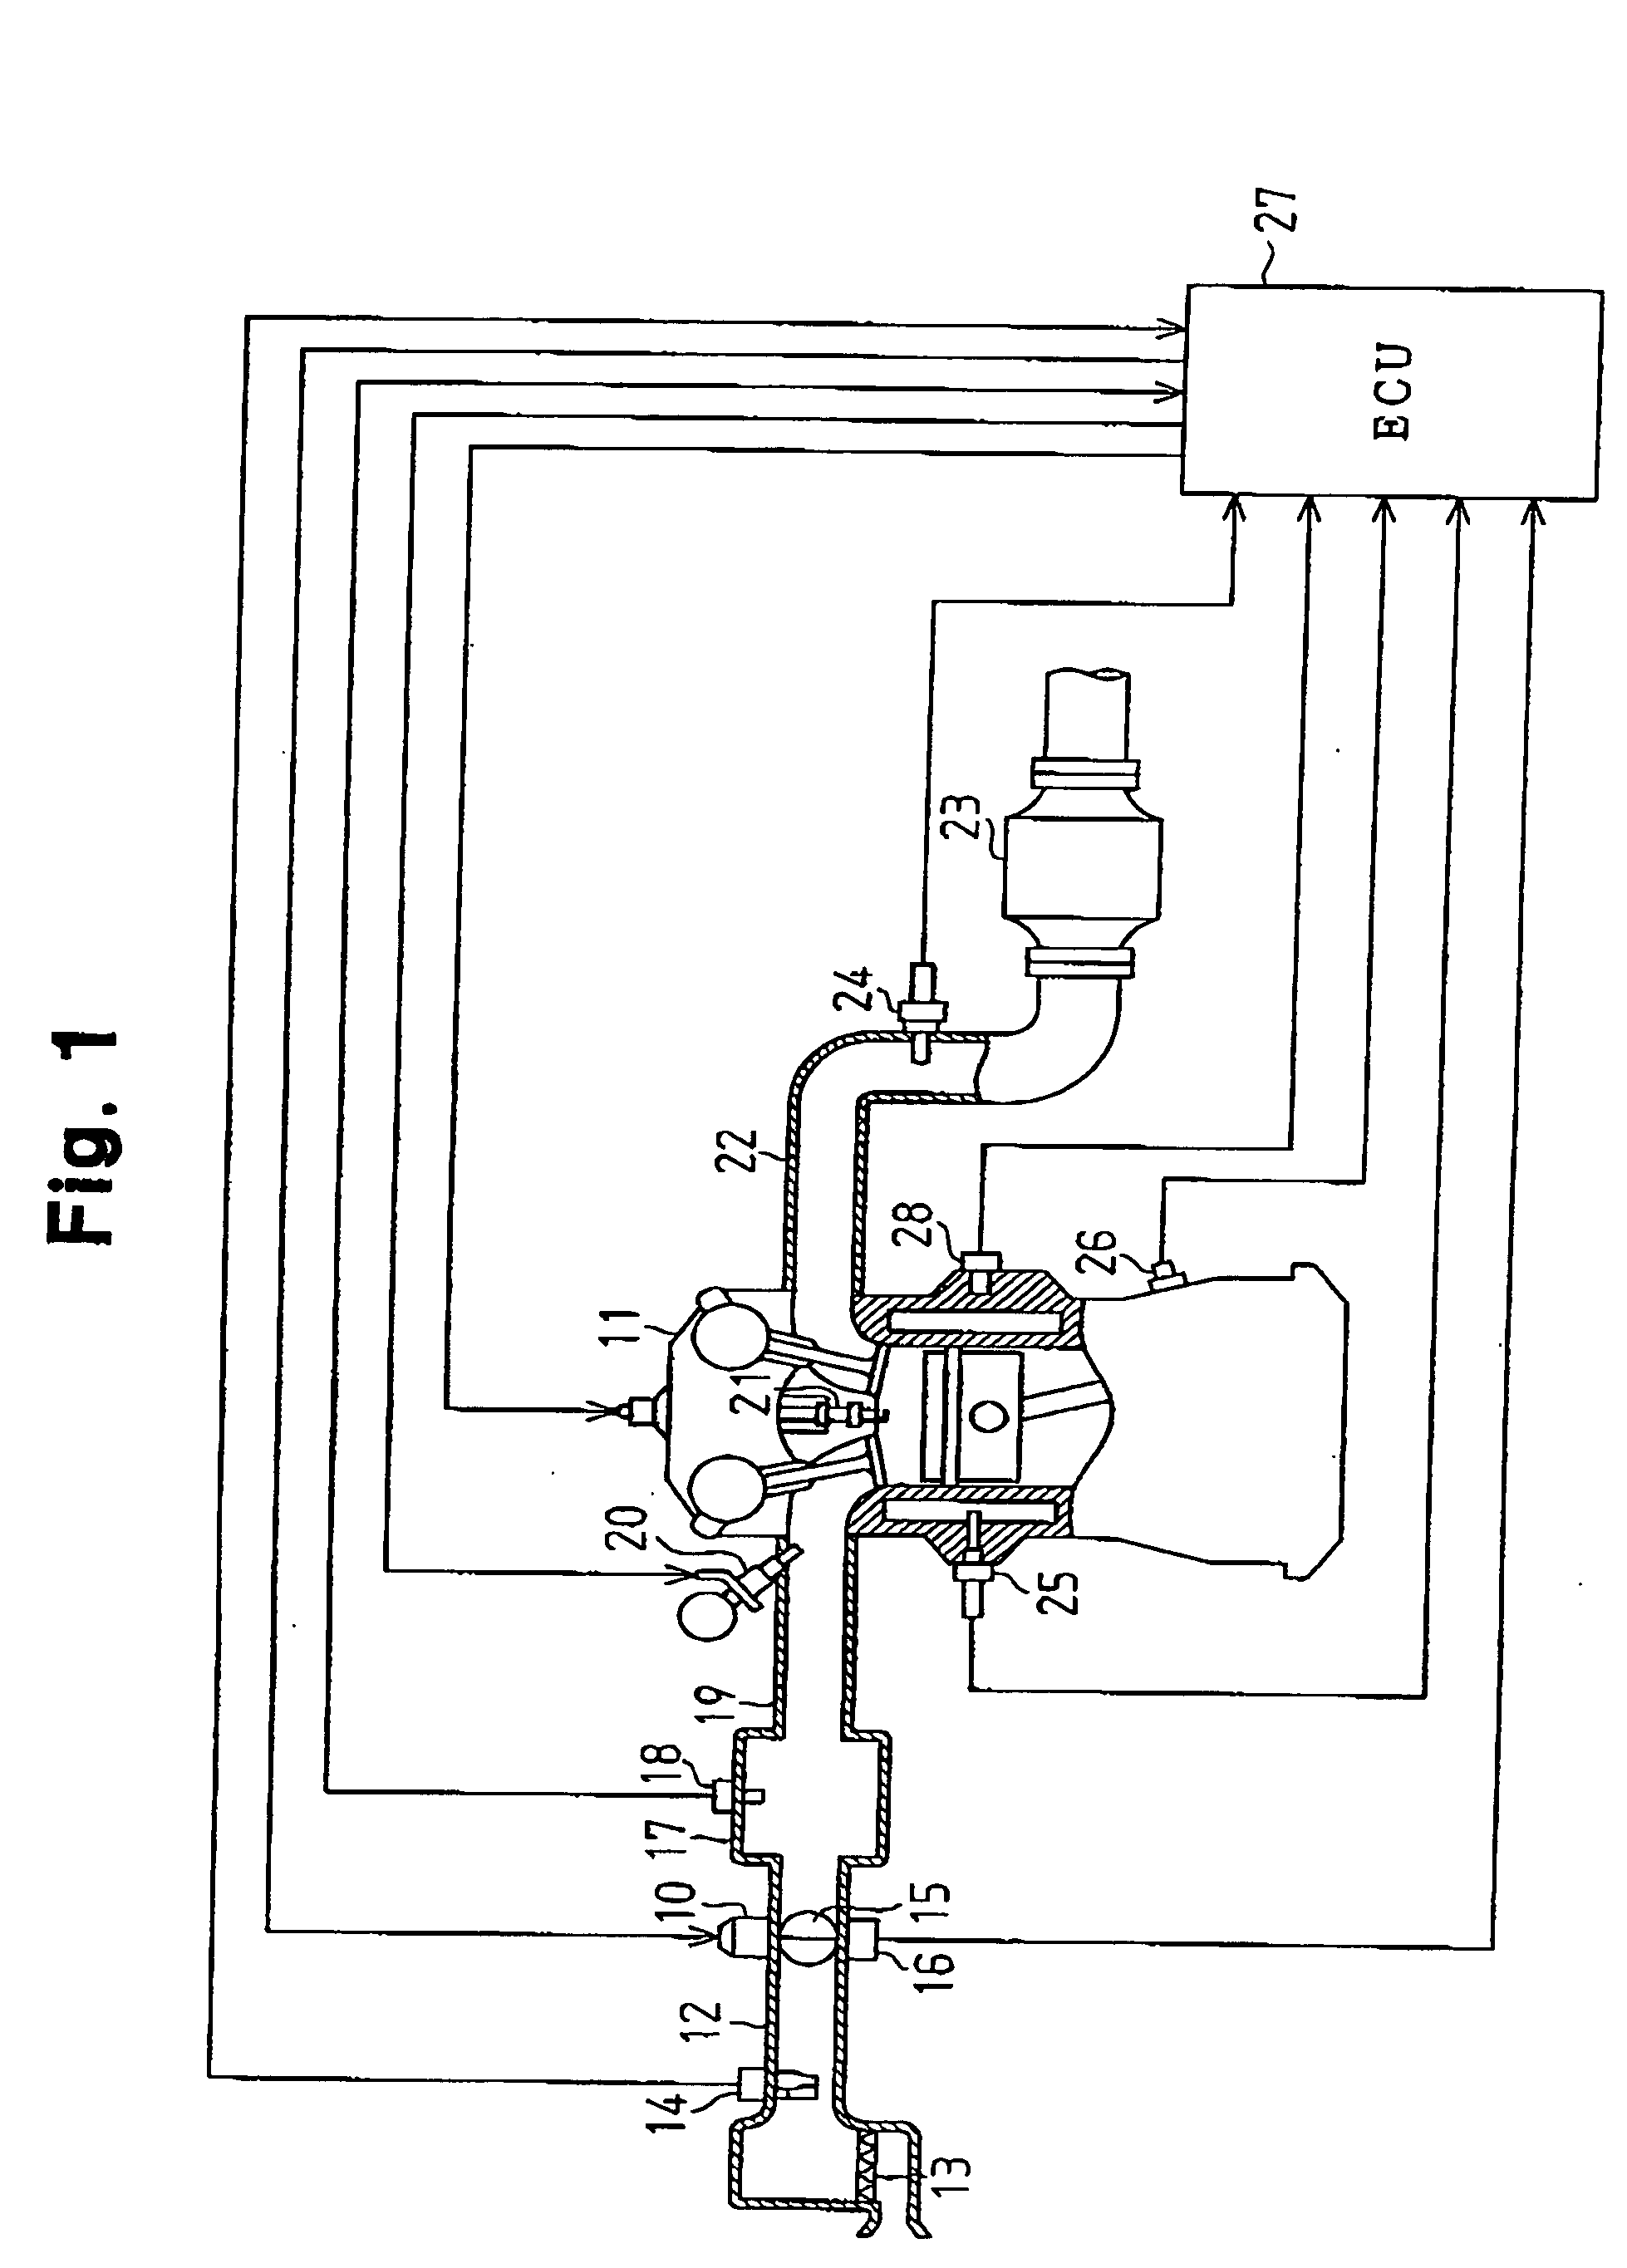 Apparatus and method for controlling internal combustion engine